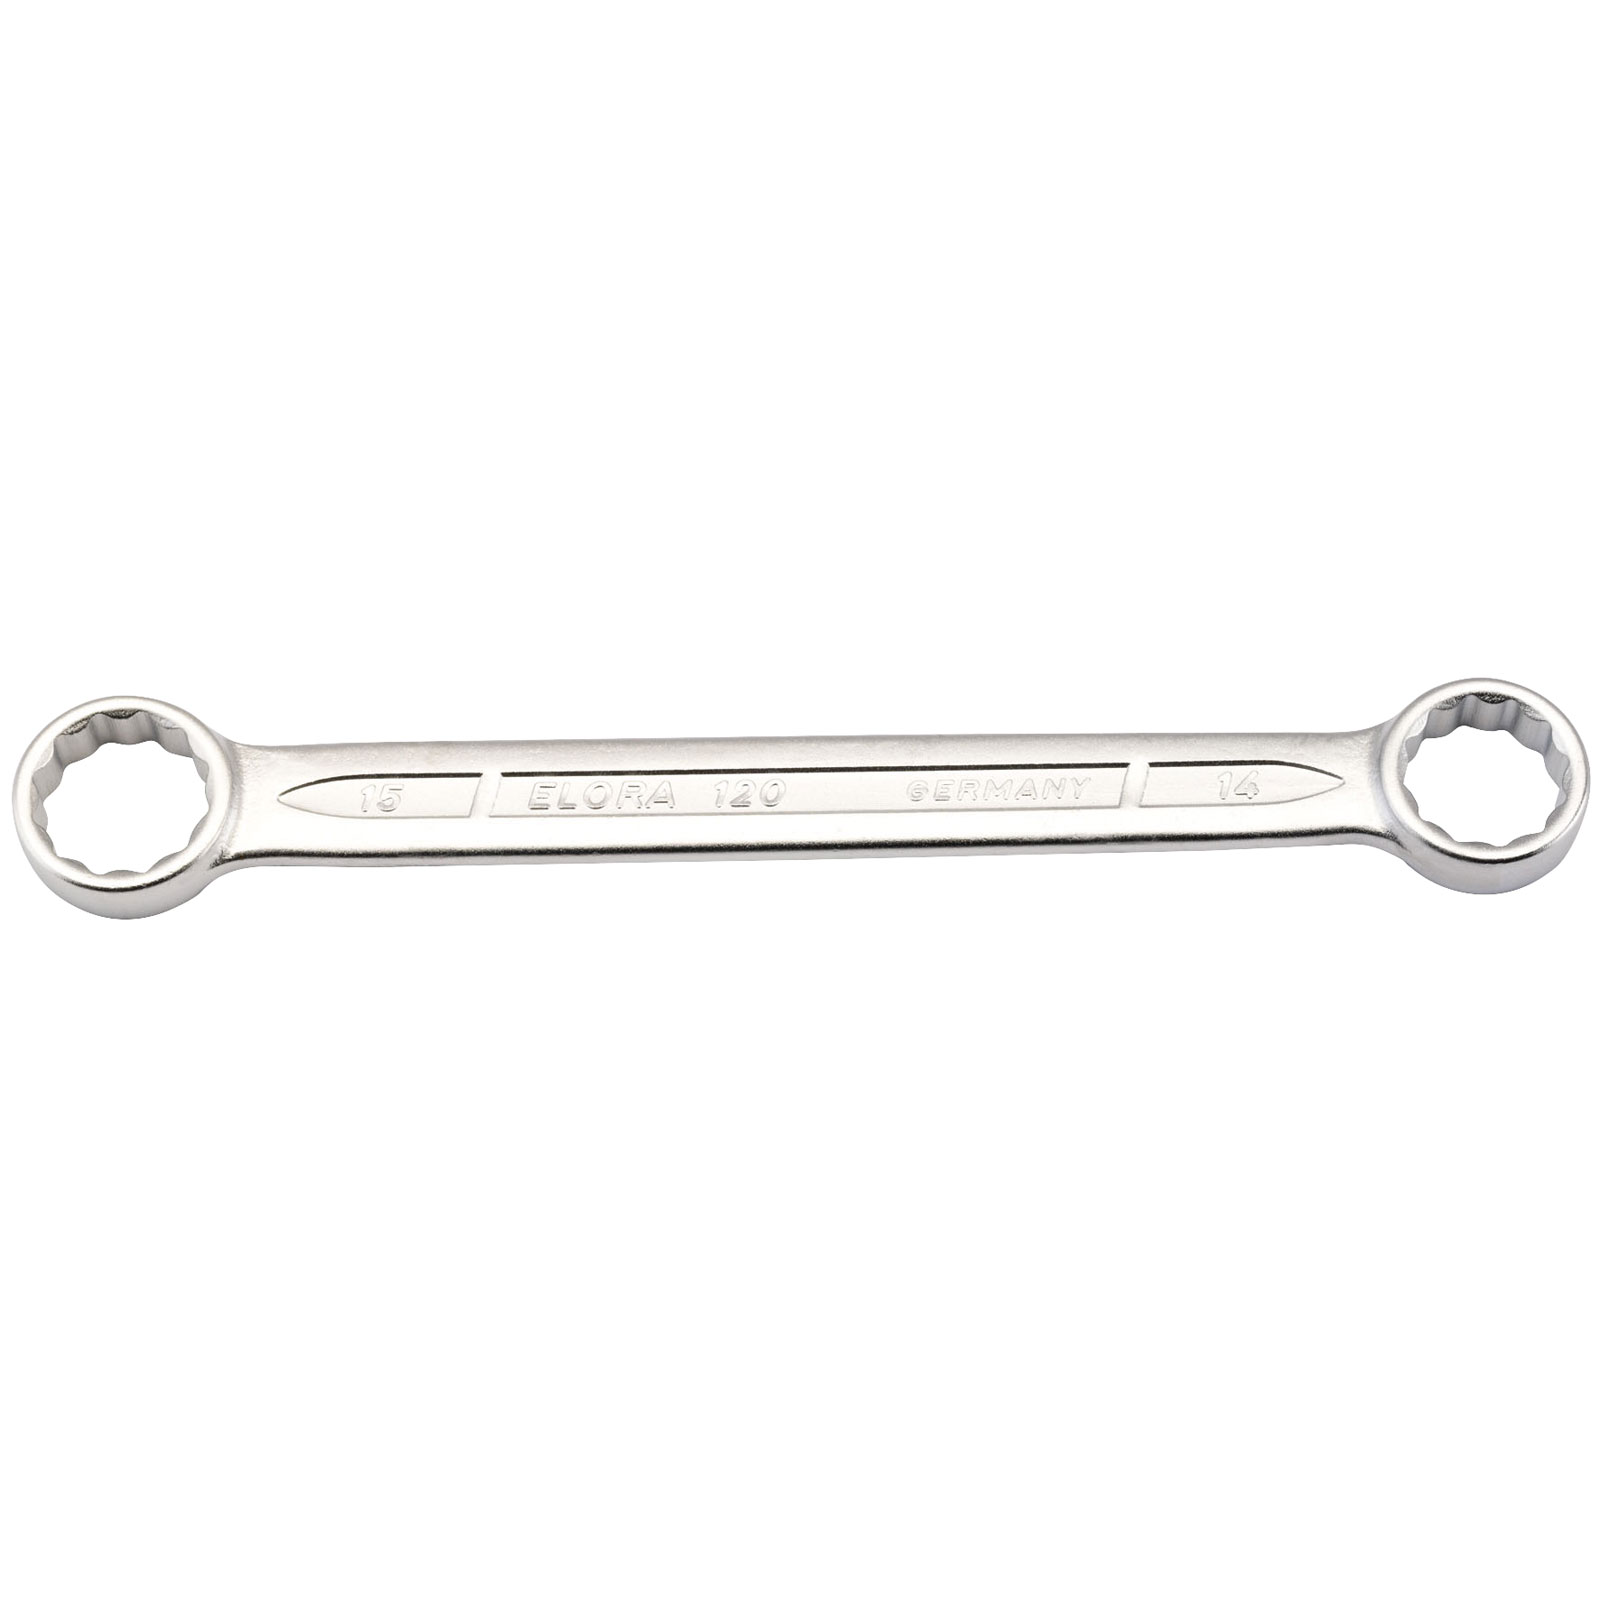 65.14X15 Facom | Facom Ratchet Ring Spanner, 14mm, Metric, Double Ended,  190 mm Overall | 236-2418 | RS Components